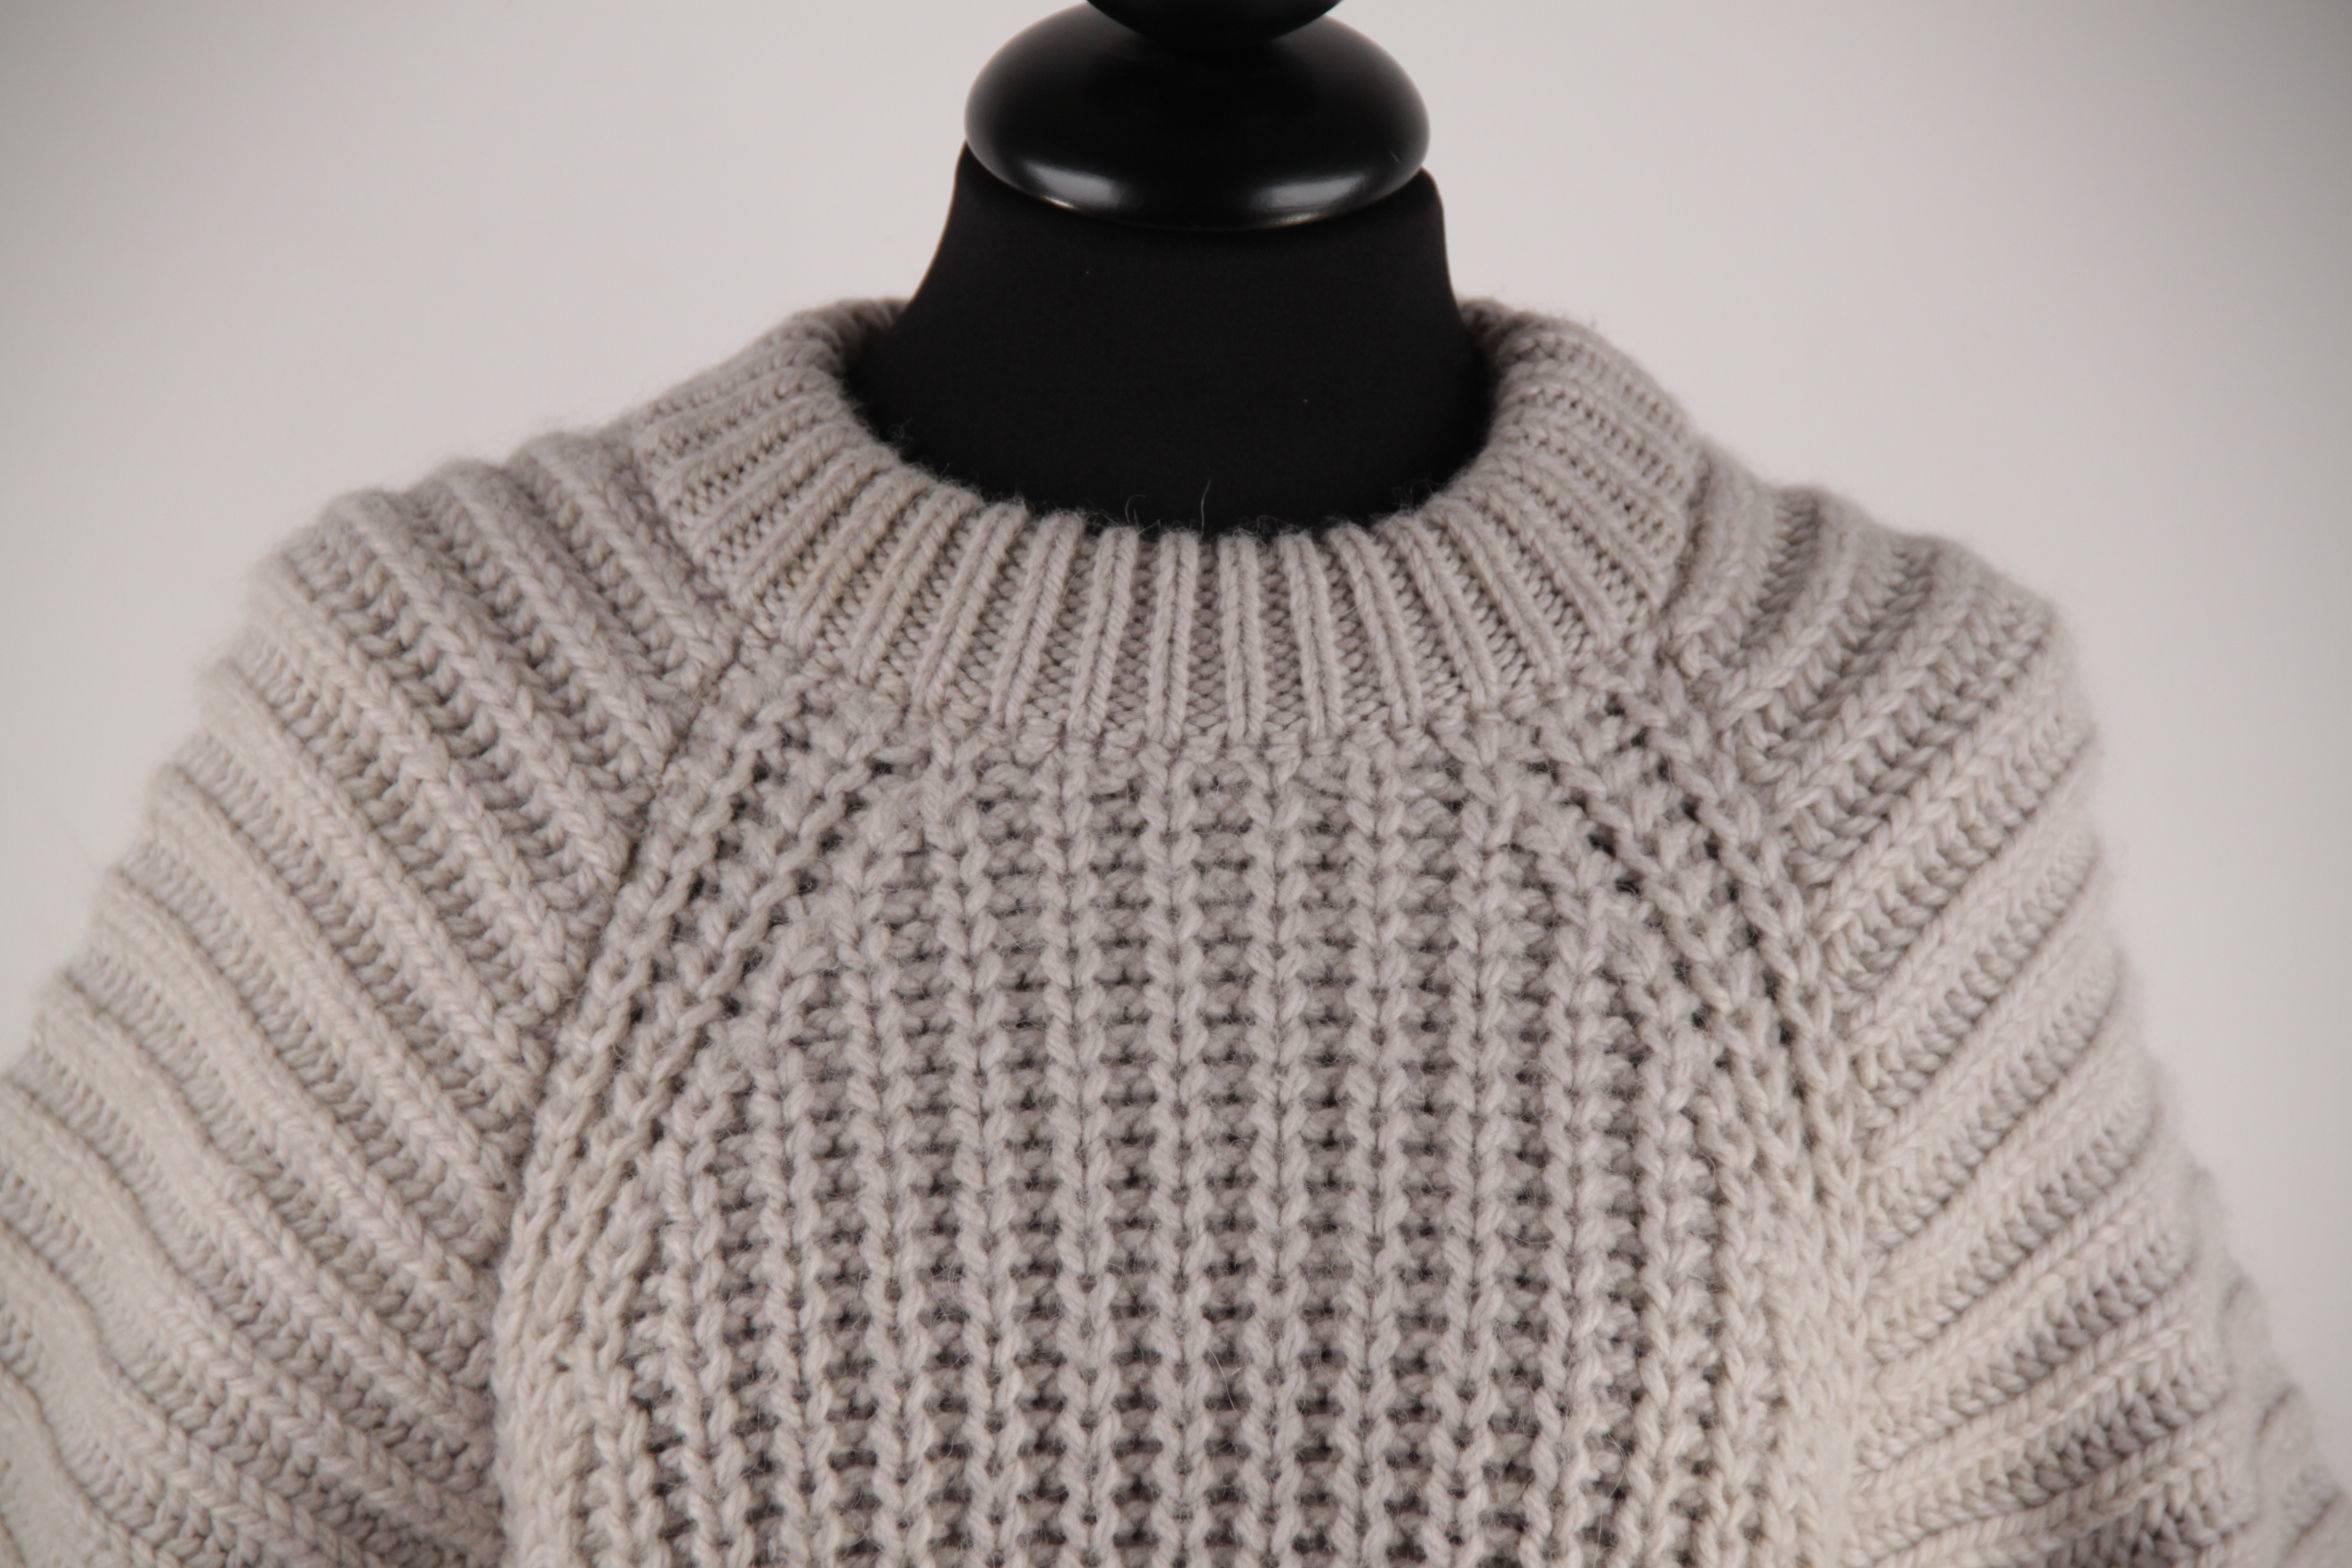  - Beige/gray wool-alpaca blend chunky knit jumper from Balenciaga
- Cropped lenght
- Ribbed crew neck
- Cropped sleeves
- contrasting diagonal knit detailing
- Size: 36 (The size shown for this item is the size indicated by the designer on the